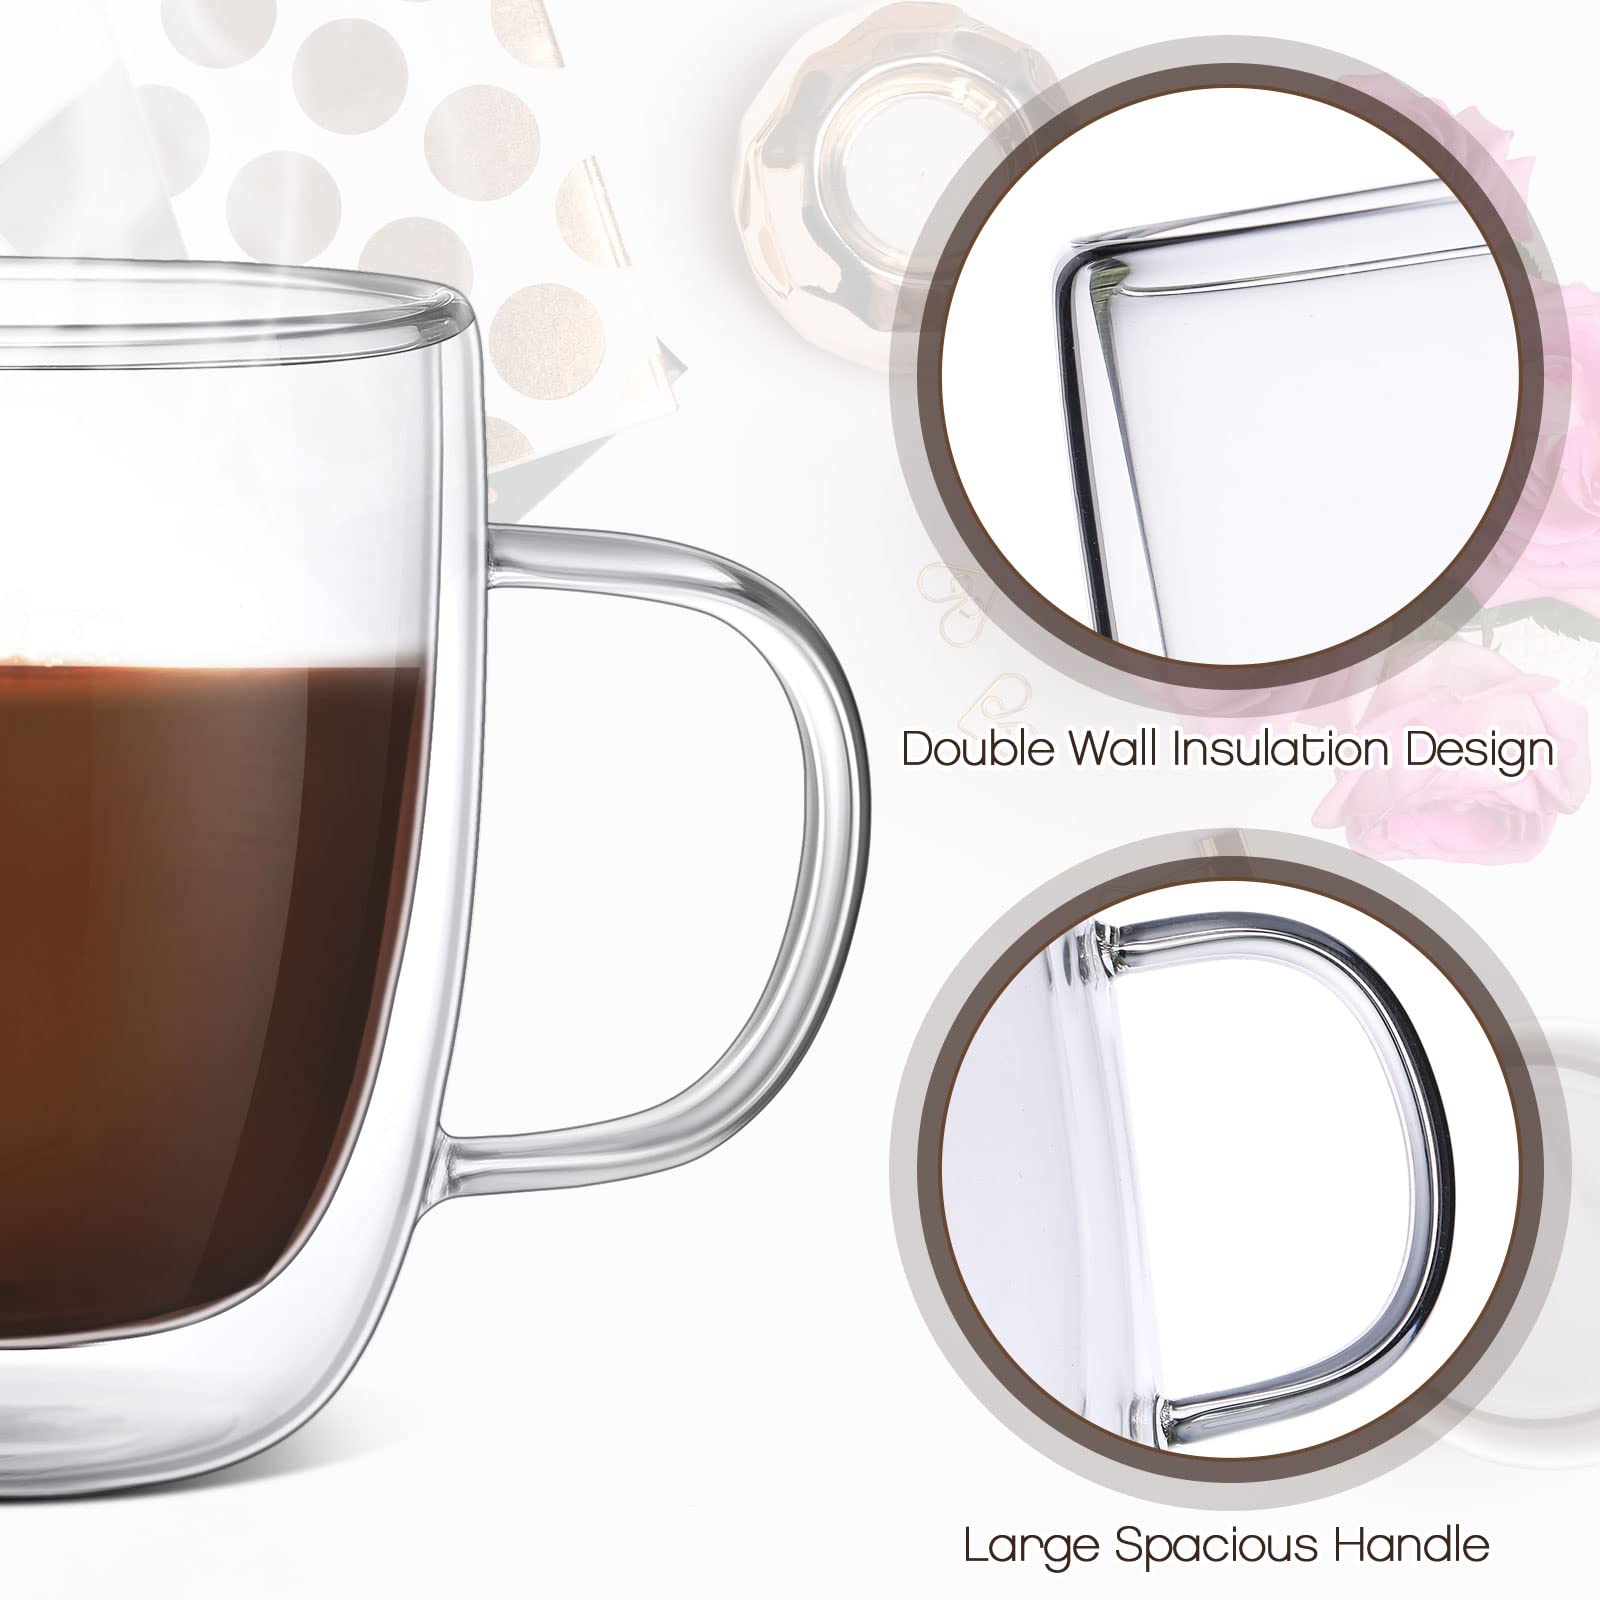 Gerrii 8 Pack 13.5 oz Double Walled Glass Coffee Mugs with Handle, Clear Glass Coffee Mugs Insulated Layer Coffee Cups Espresso Mug Cups for Cafe Latte Cappuccino Tea